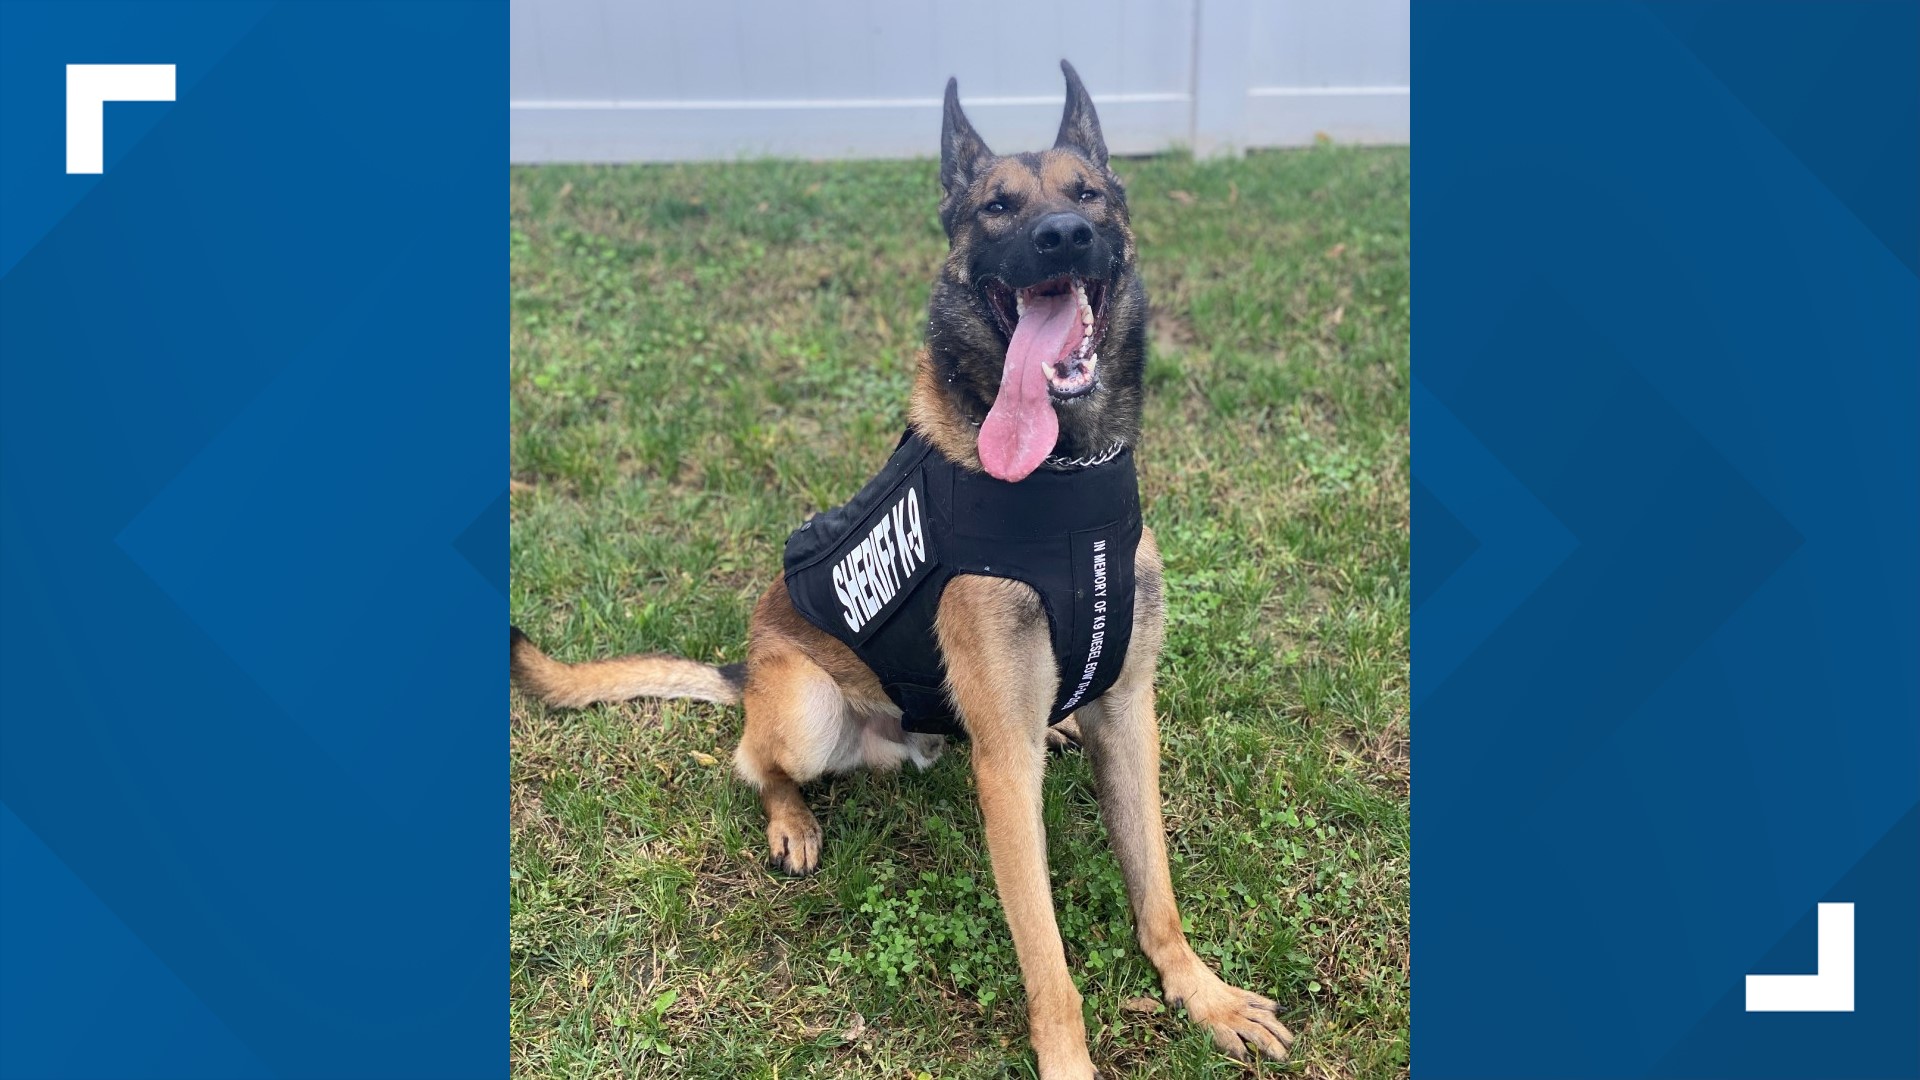 The vest pays homage to another Bartholomew County K-9 who died in the line of duty in 2020.